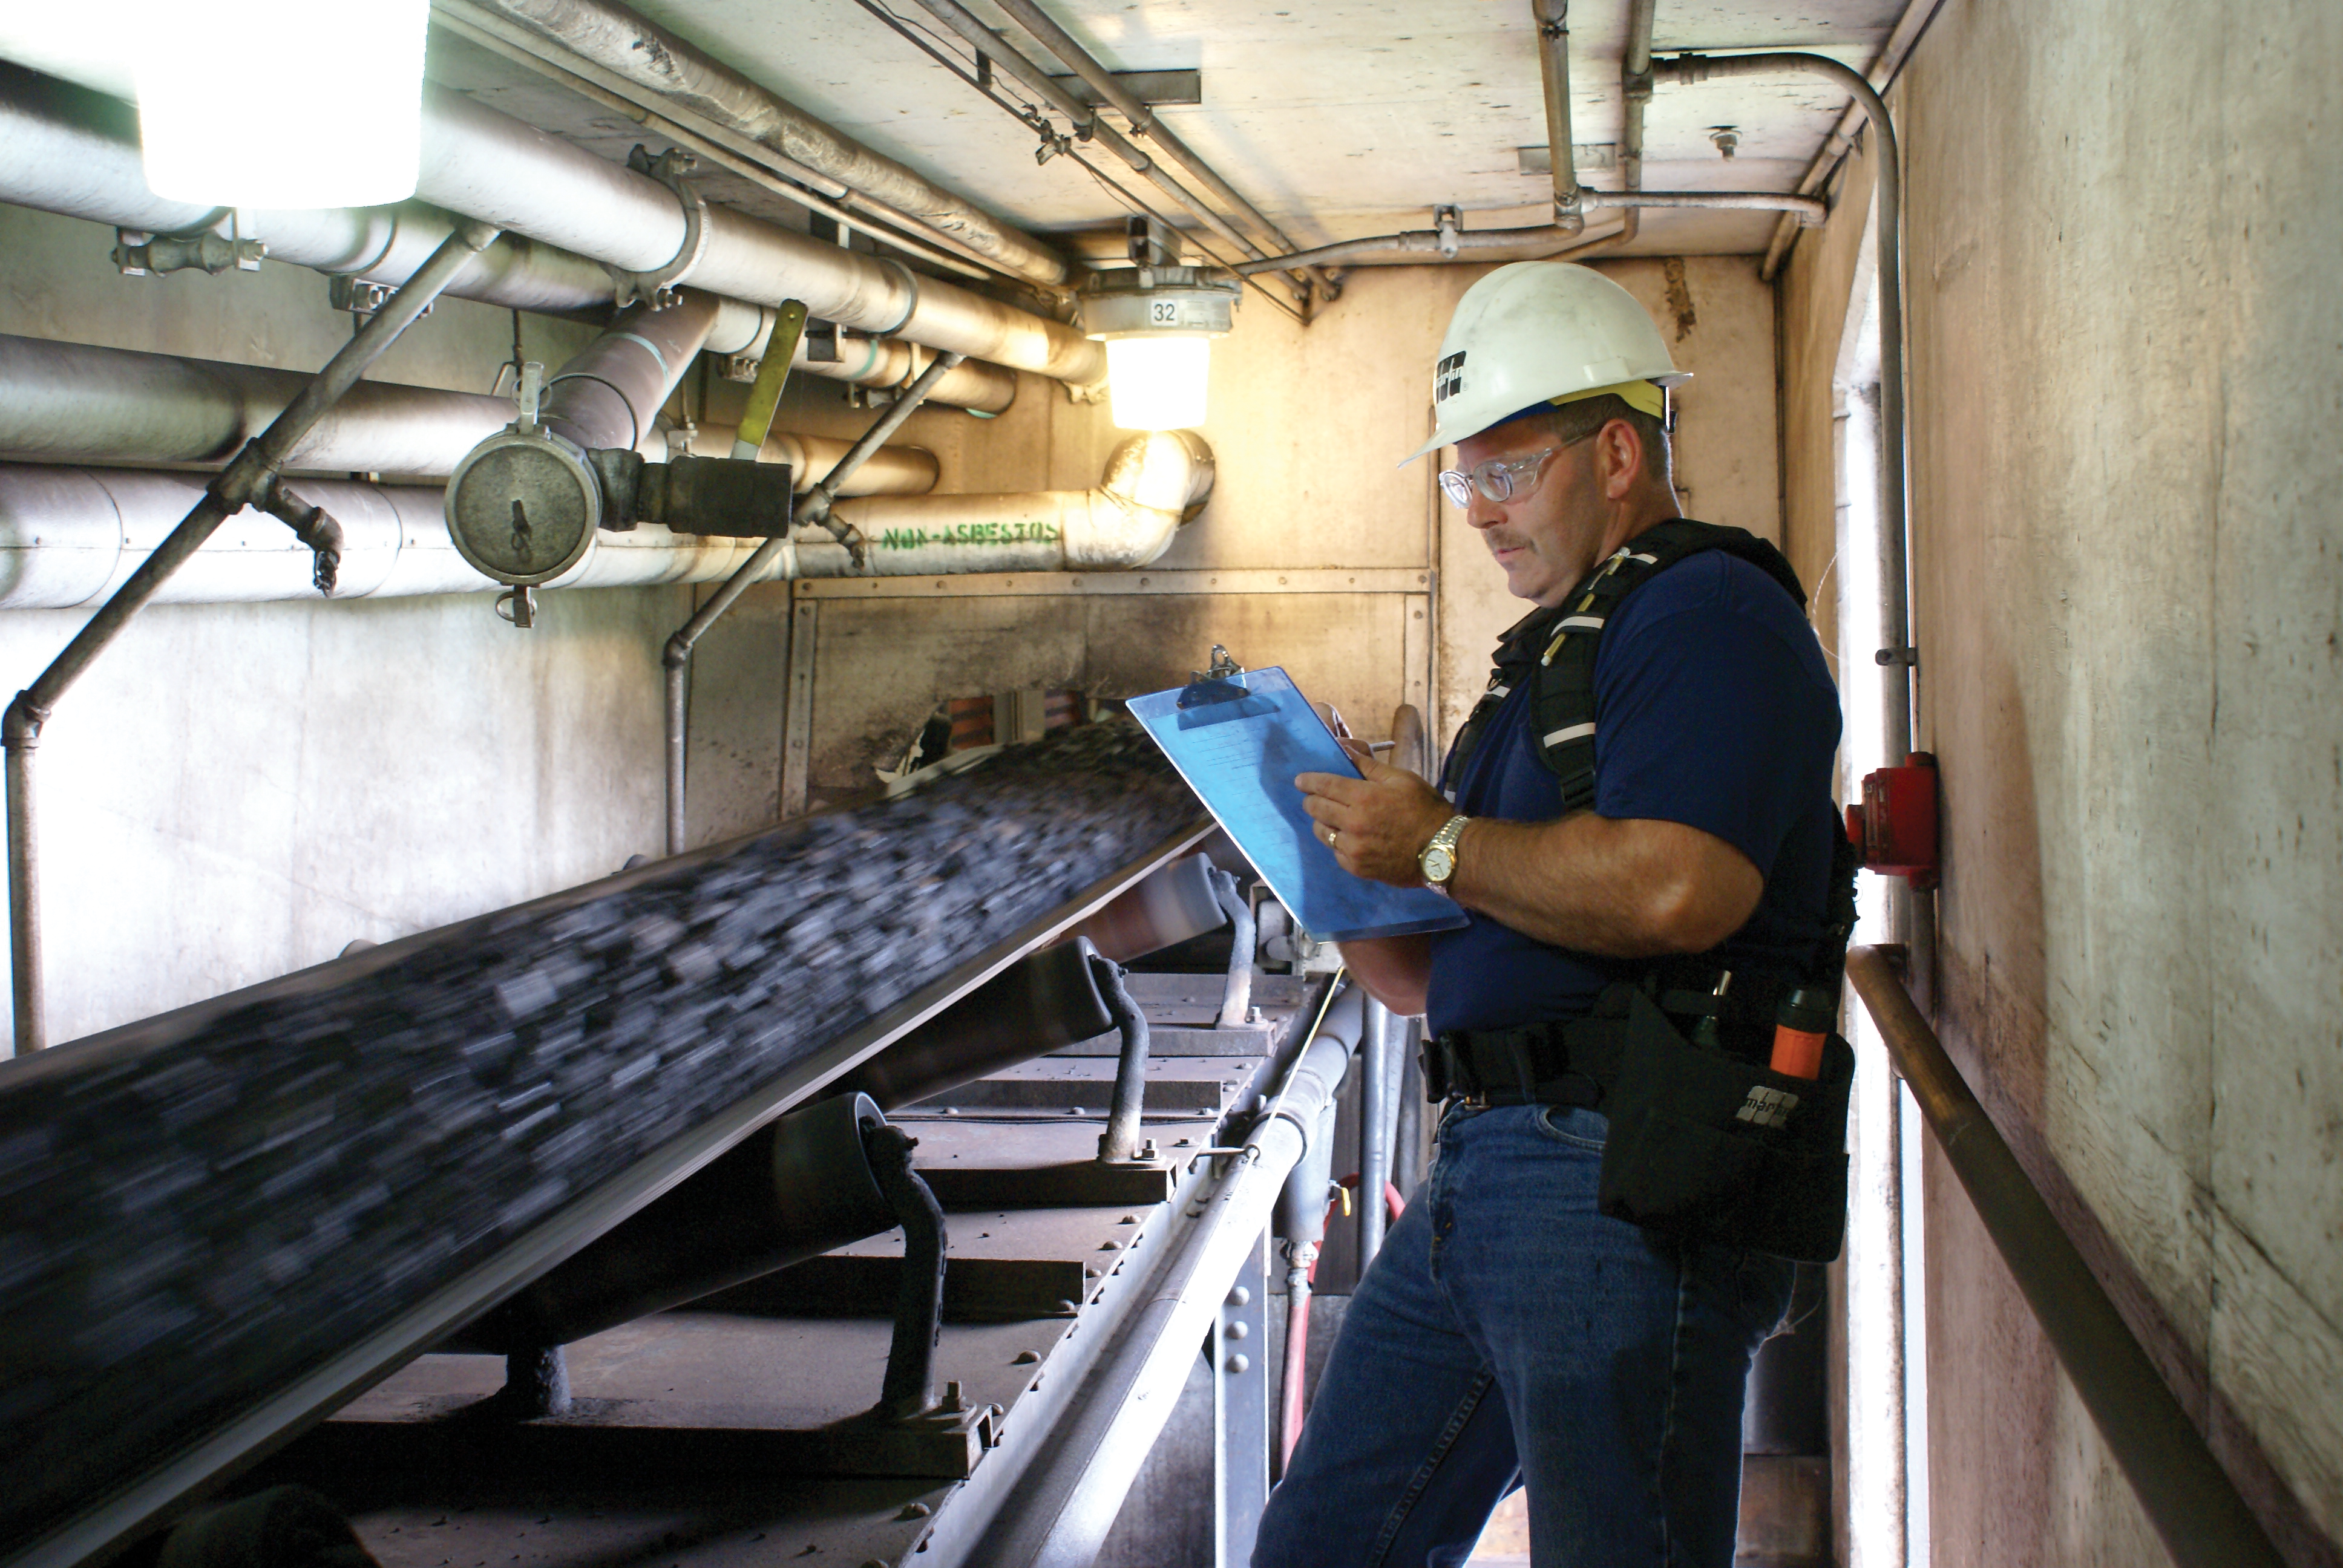 A consultant inspects a belt conveyor system in operation.